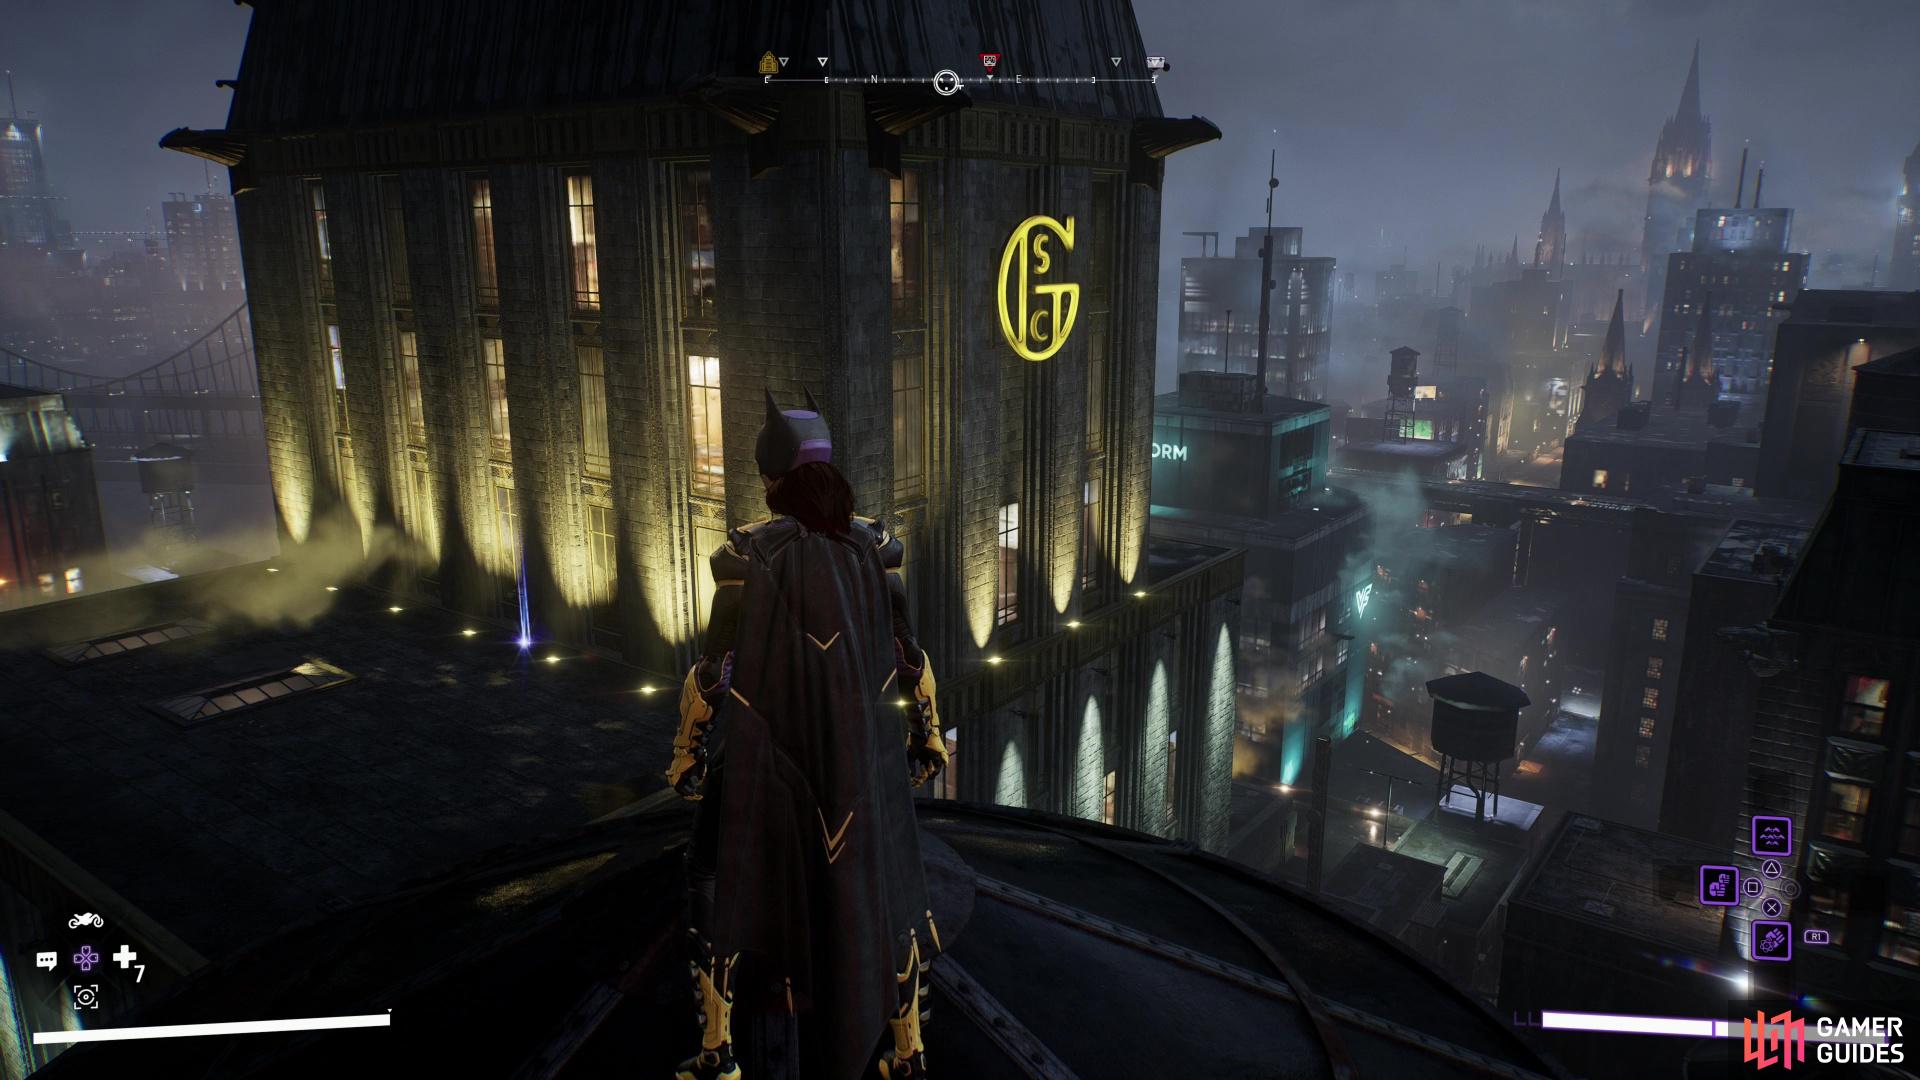 Search near the top of the unmarked Gotham City Shopping Center to find a Batarang.